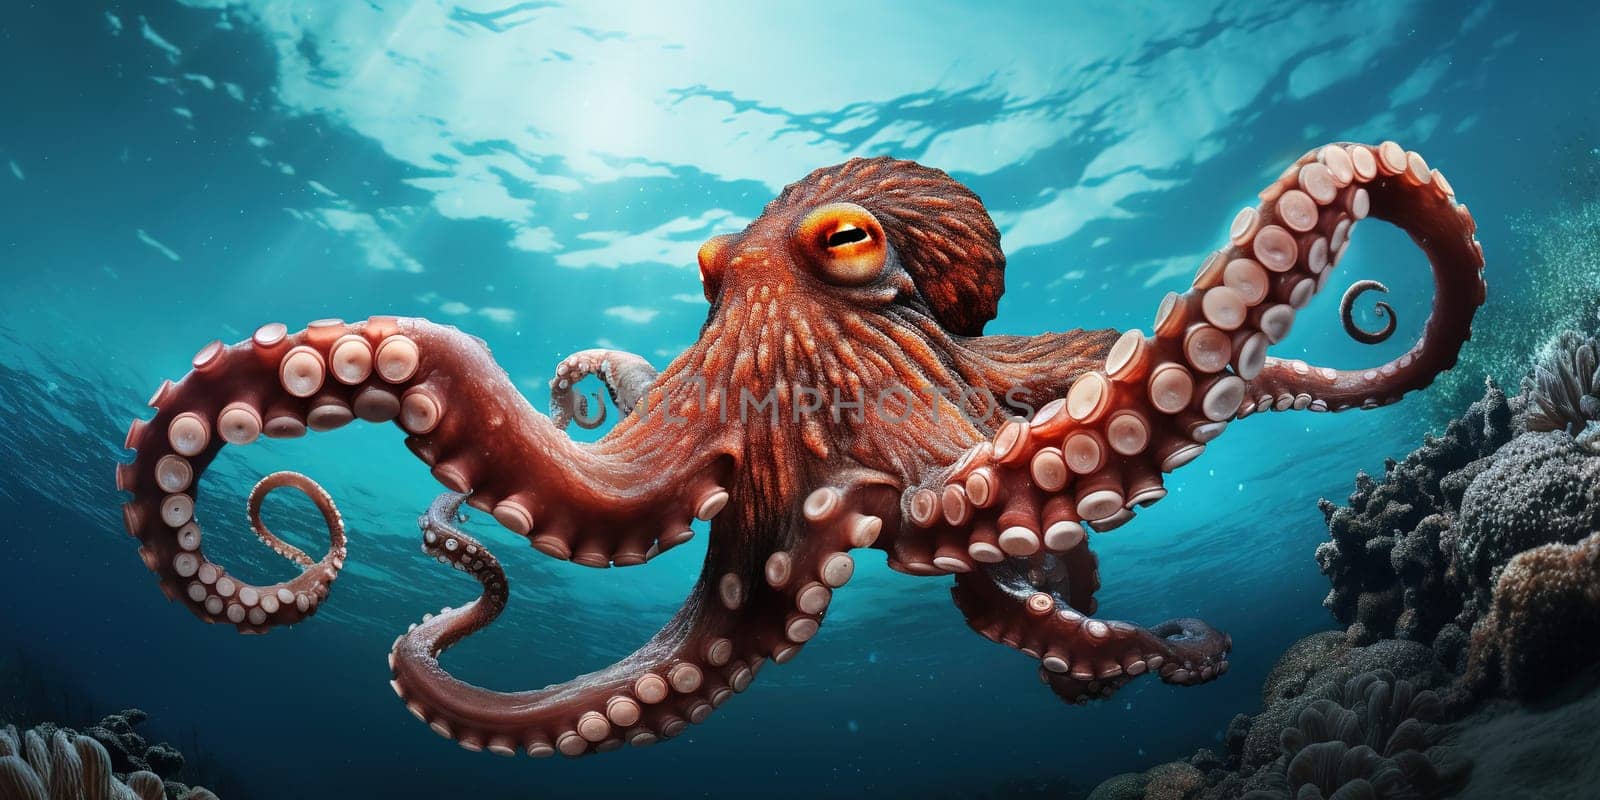 Huge octopus underwater at the sea, nature and wildlife concept by Kadula